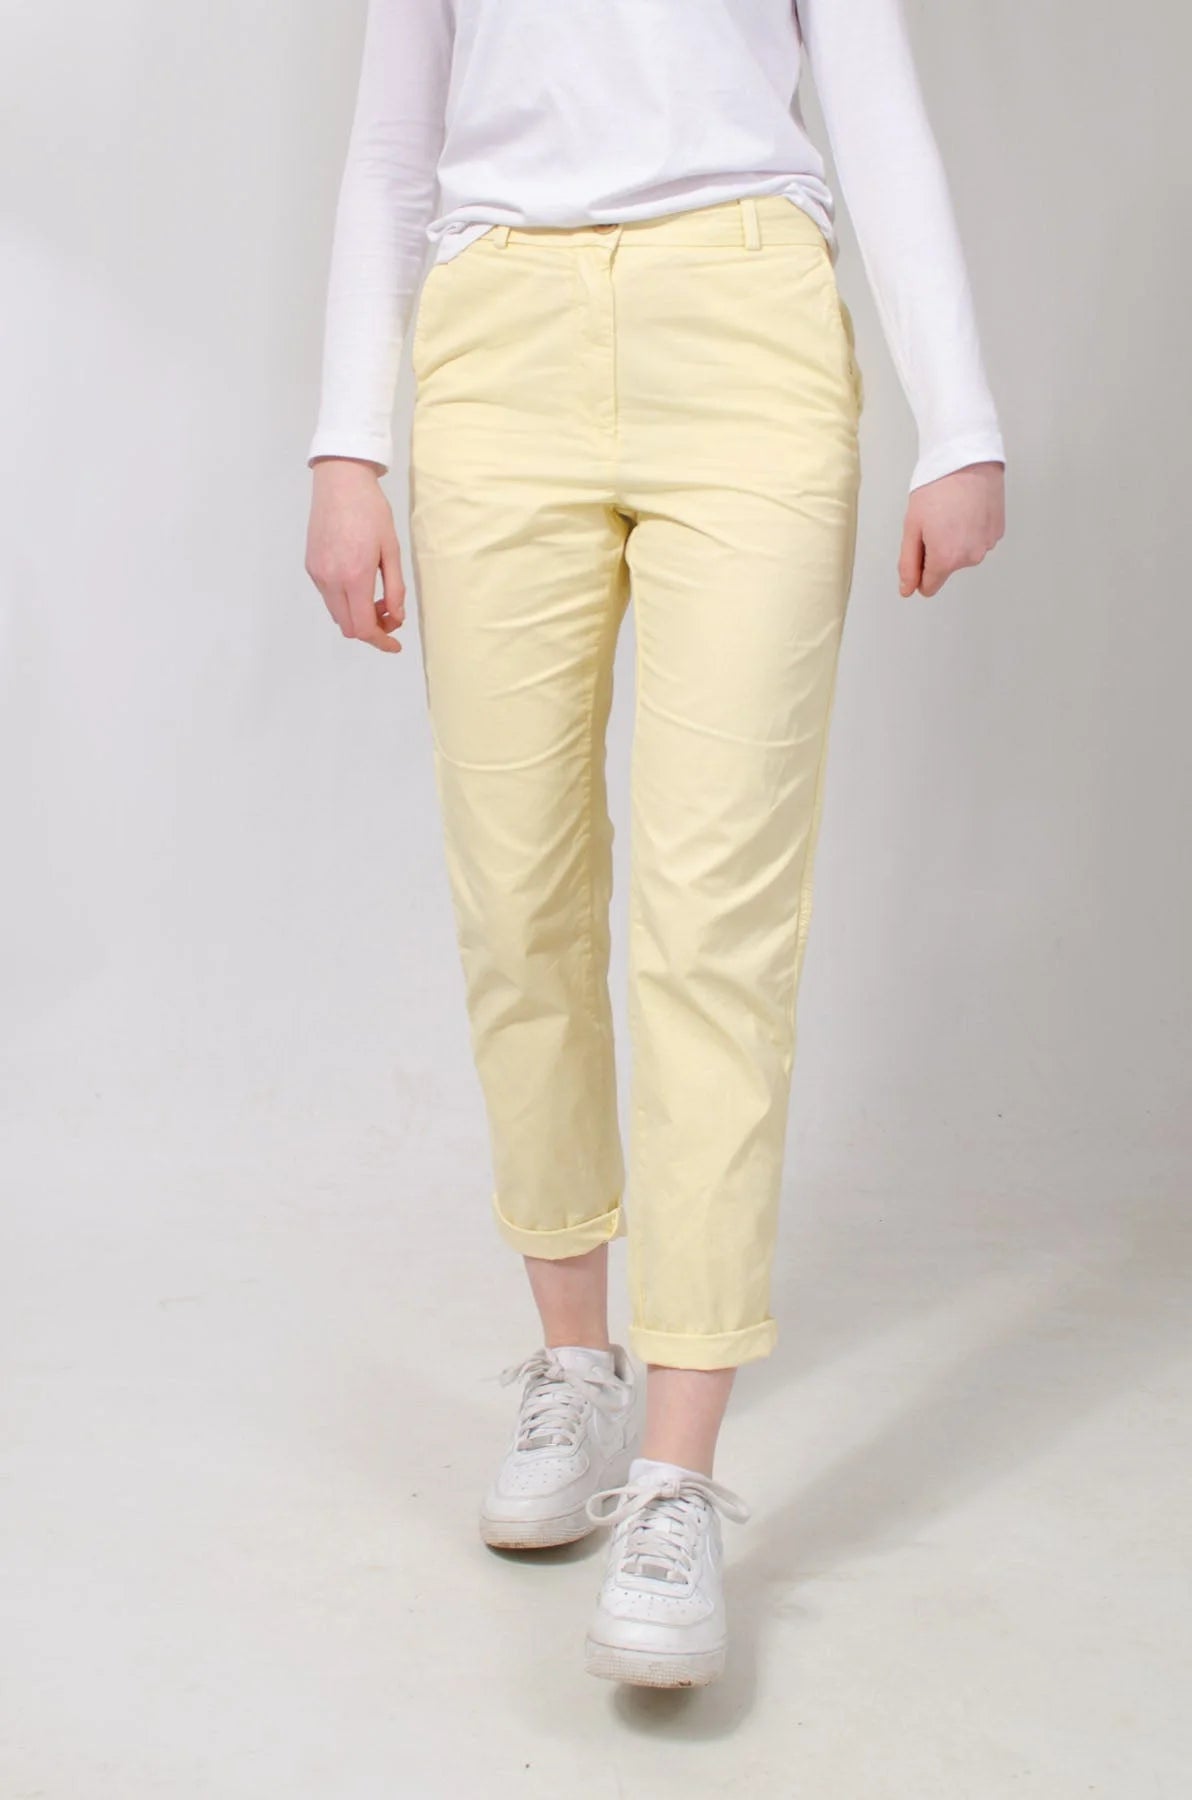 M&S Cotton Casual Chino Trousers Pale Yellow / 16 / Reg